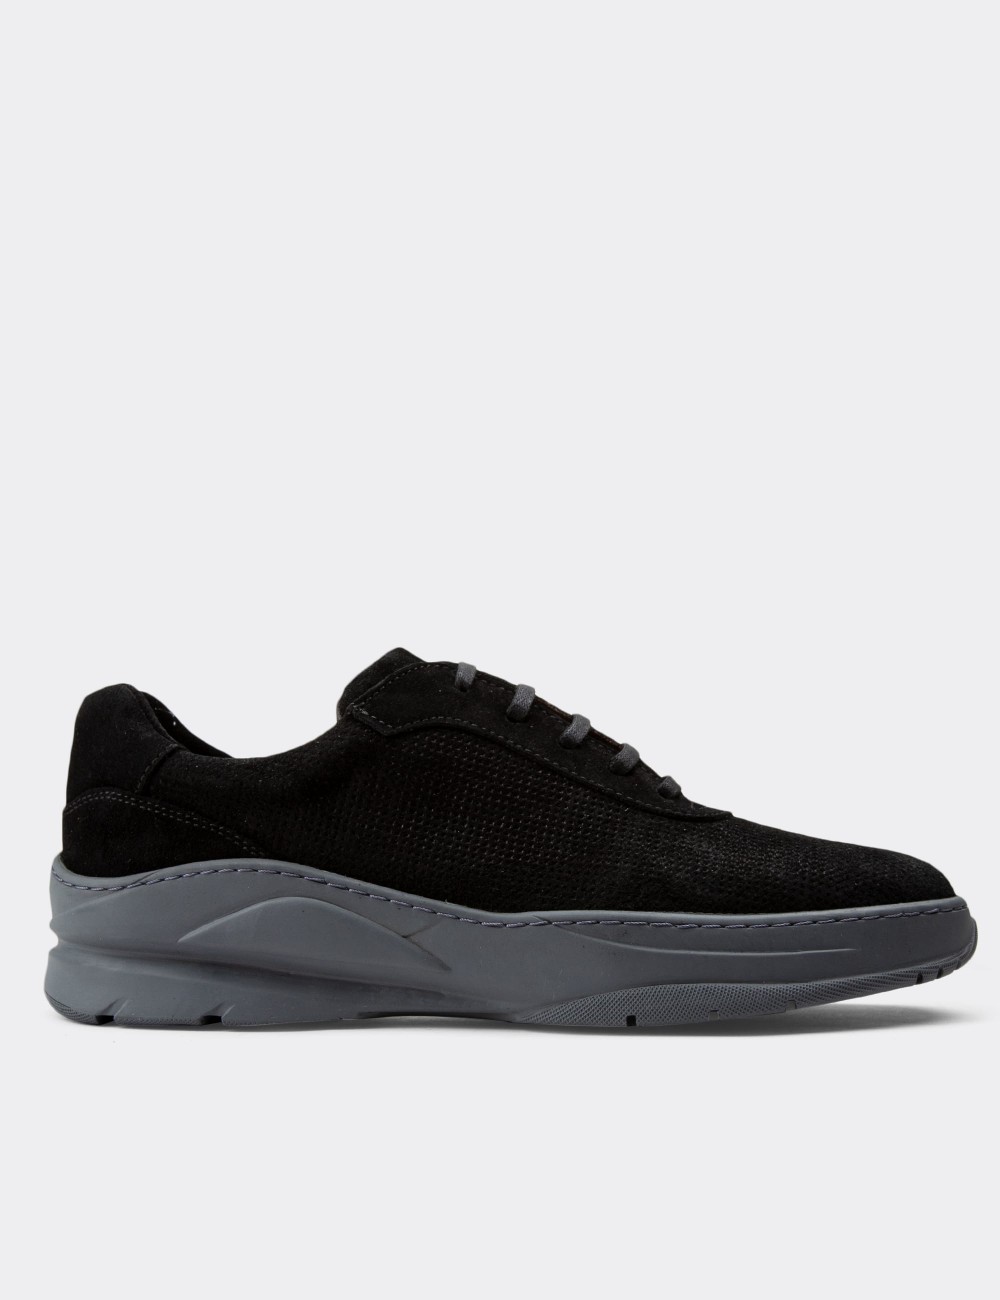 Black Suede Leather Sneakers - 01879MSYHC02